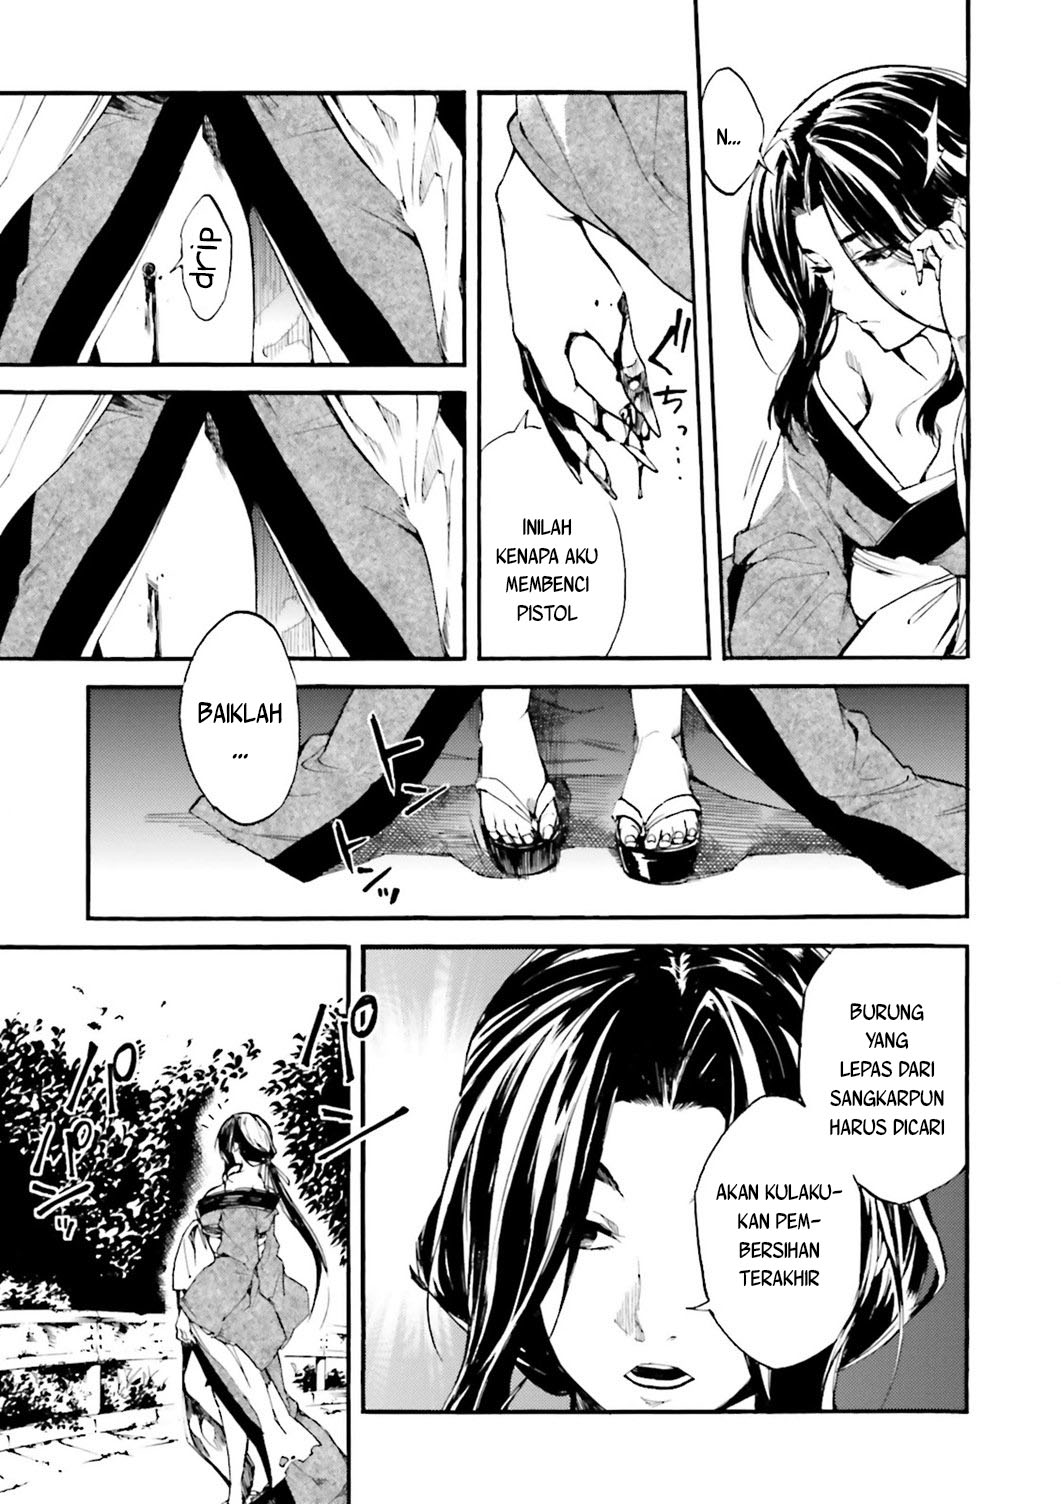 Kuhime Chapter 6